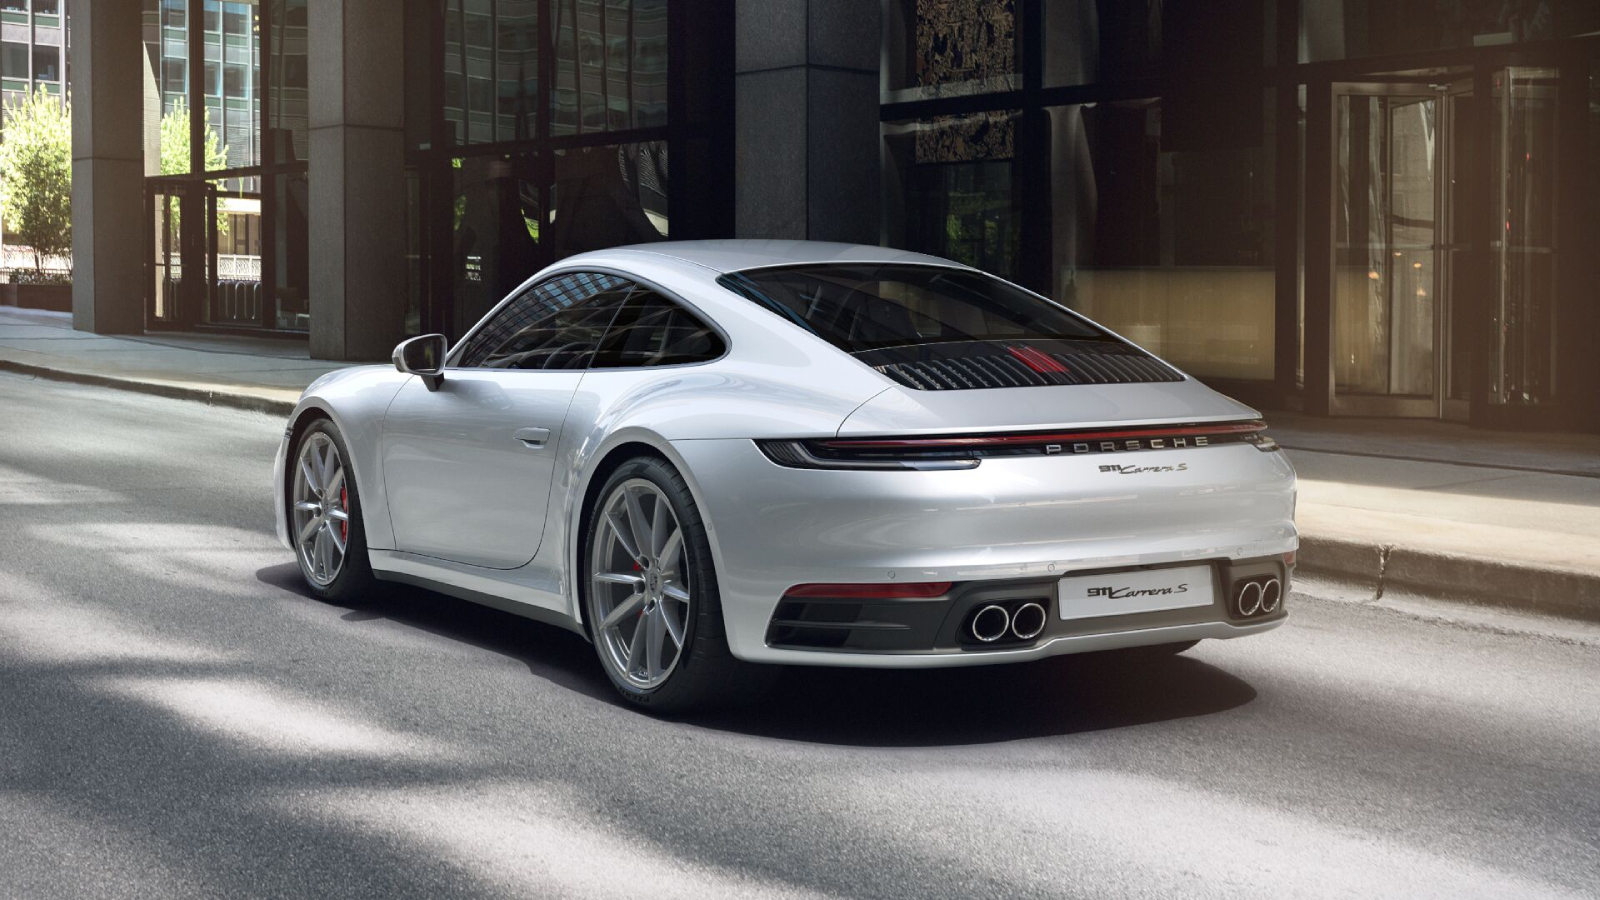 Porsche 911 Carerra S is one of the most affordable supercars